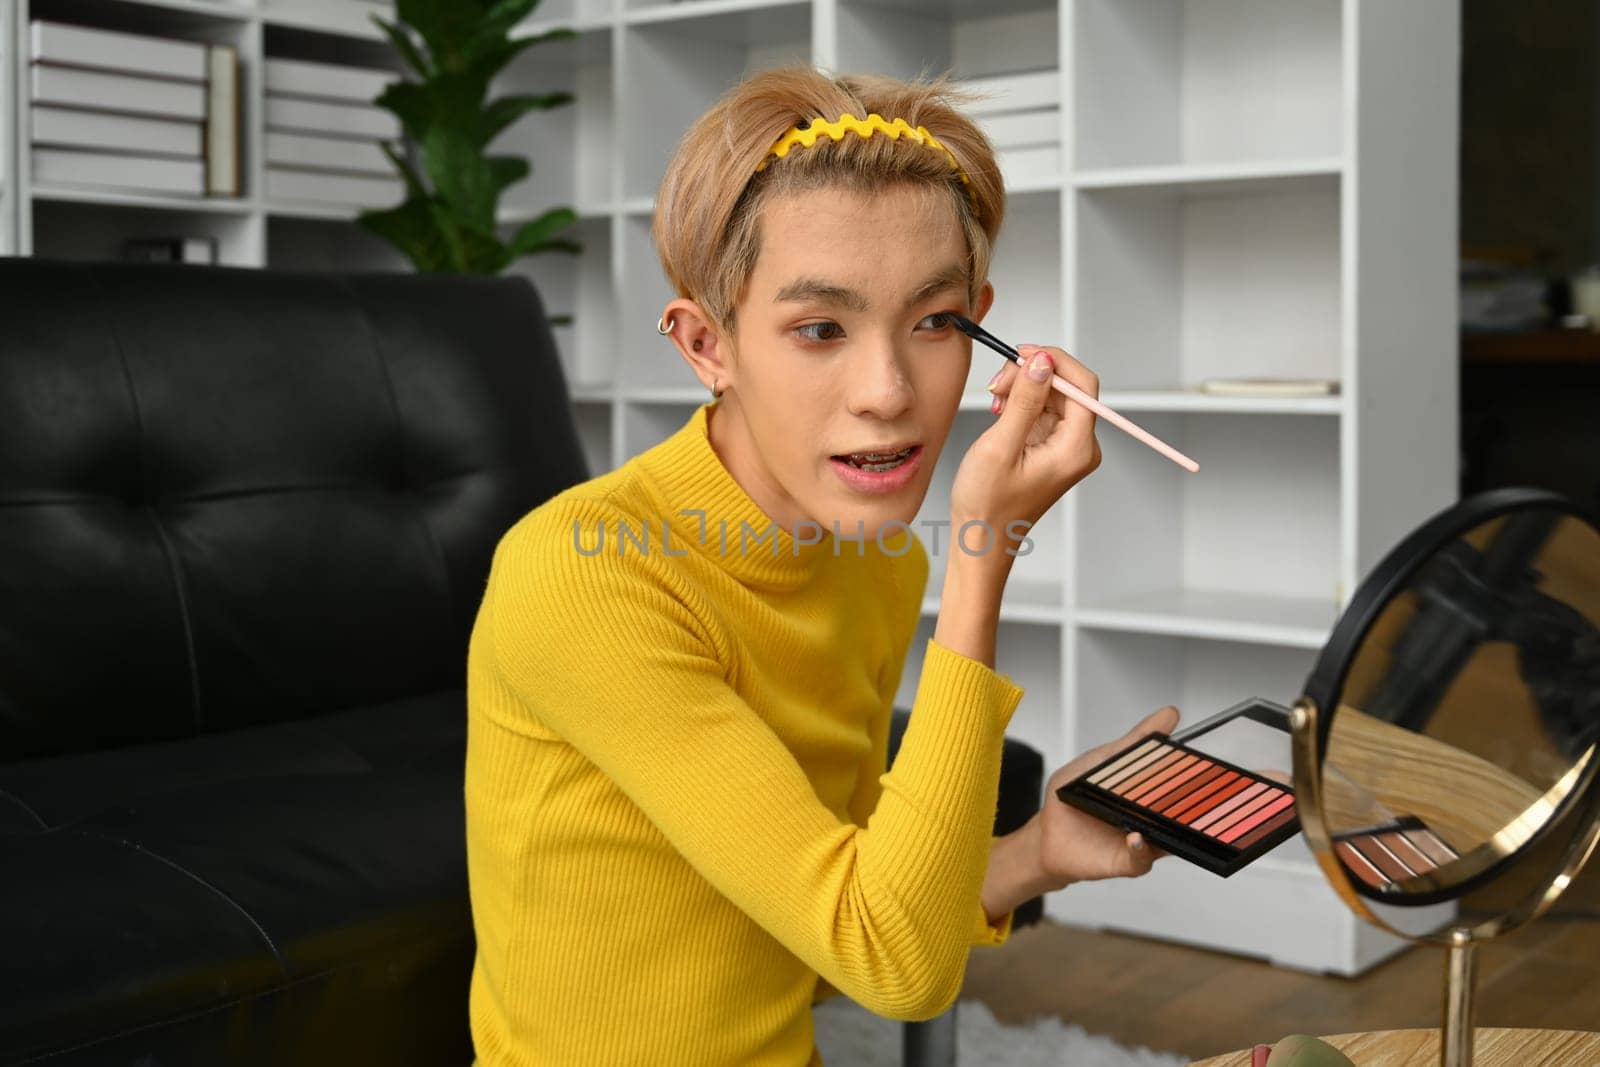 Attractive young gay man looking at mirror and applying eye shadow with brush. LGBTQ, domestic life, fashion and beauty concept.